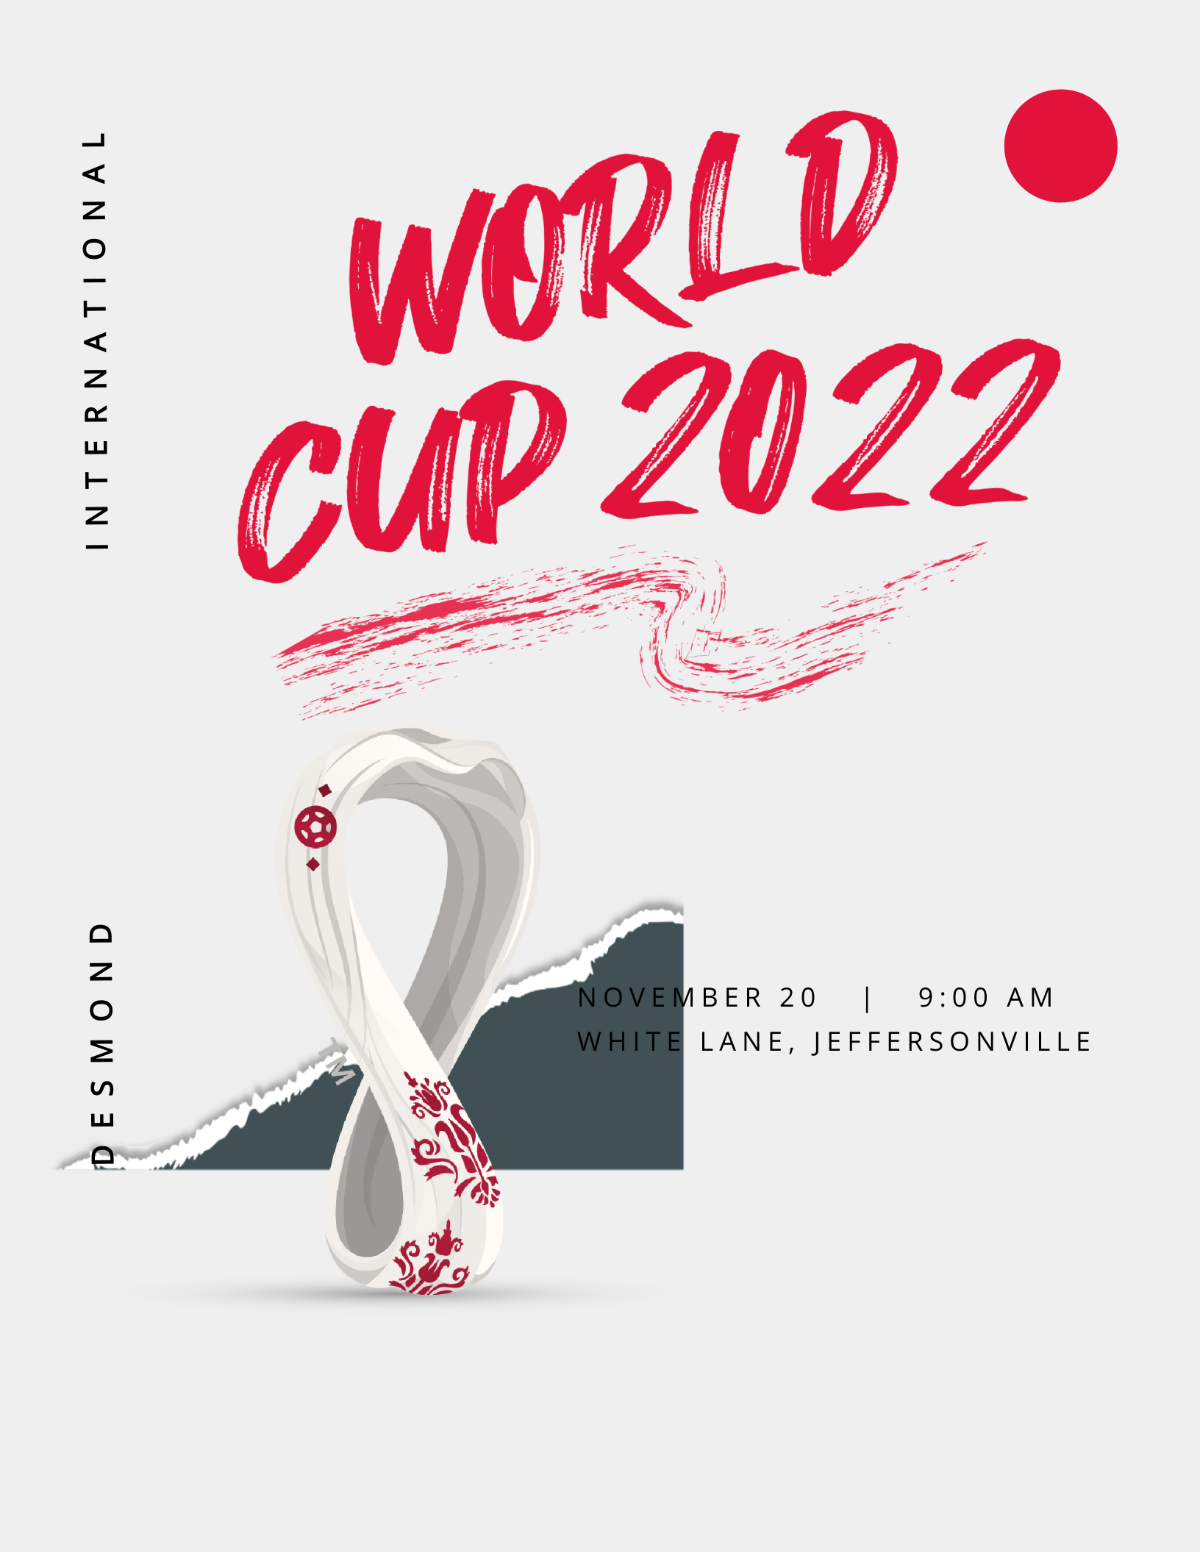 World Cup 2022 Event Flyer Template